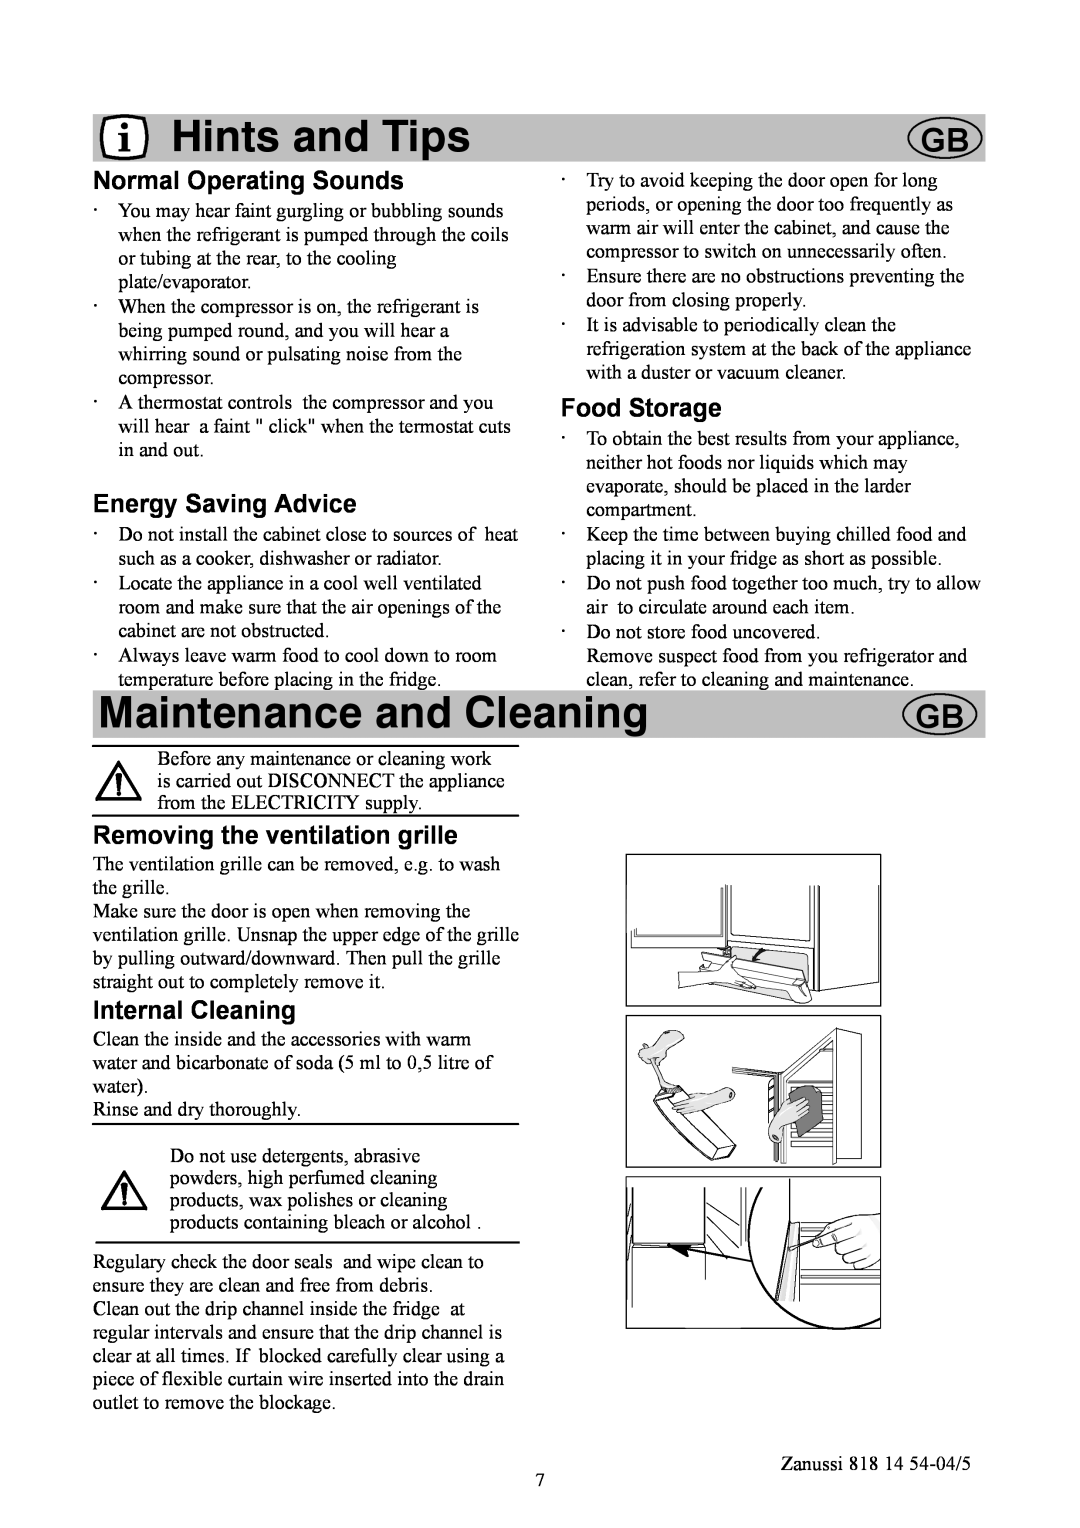 Zanussi ZR714W manual Hints and Tips, Maintenance and Cleaning, Normal Operating Sounds, Food Storage, Energy Saving Advice 